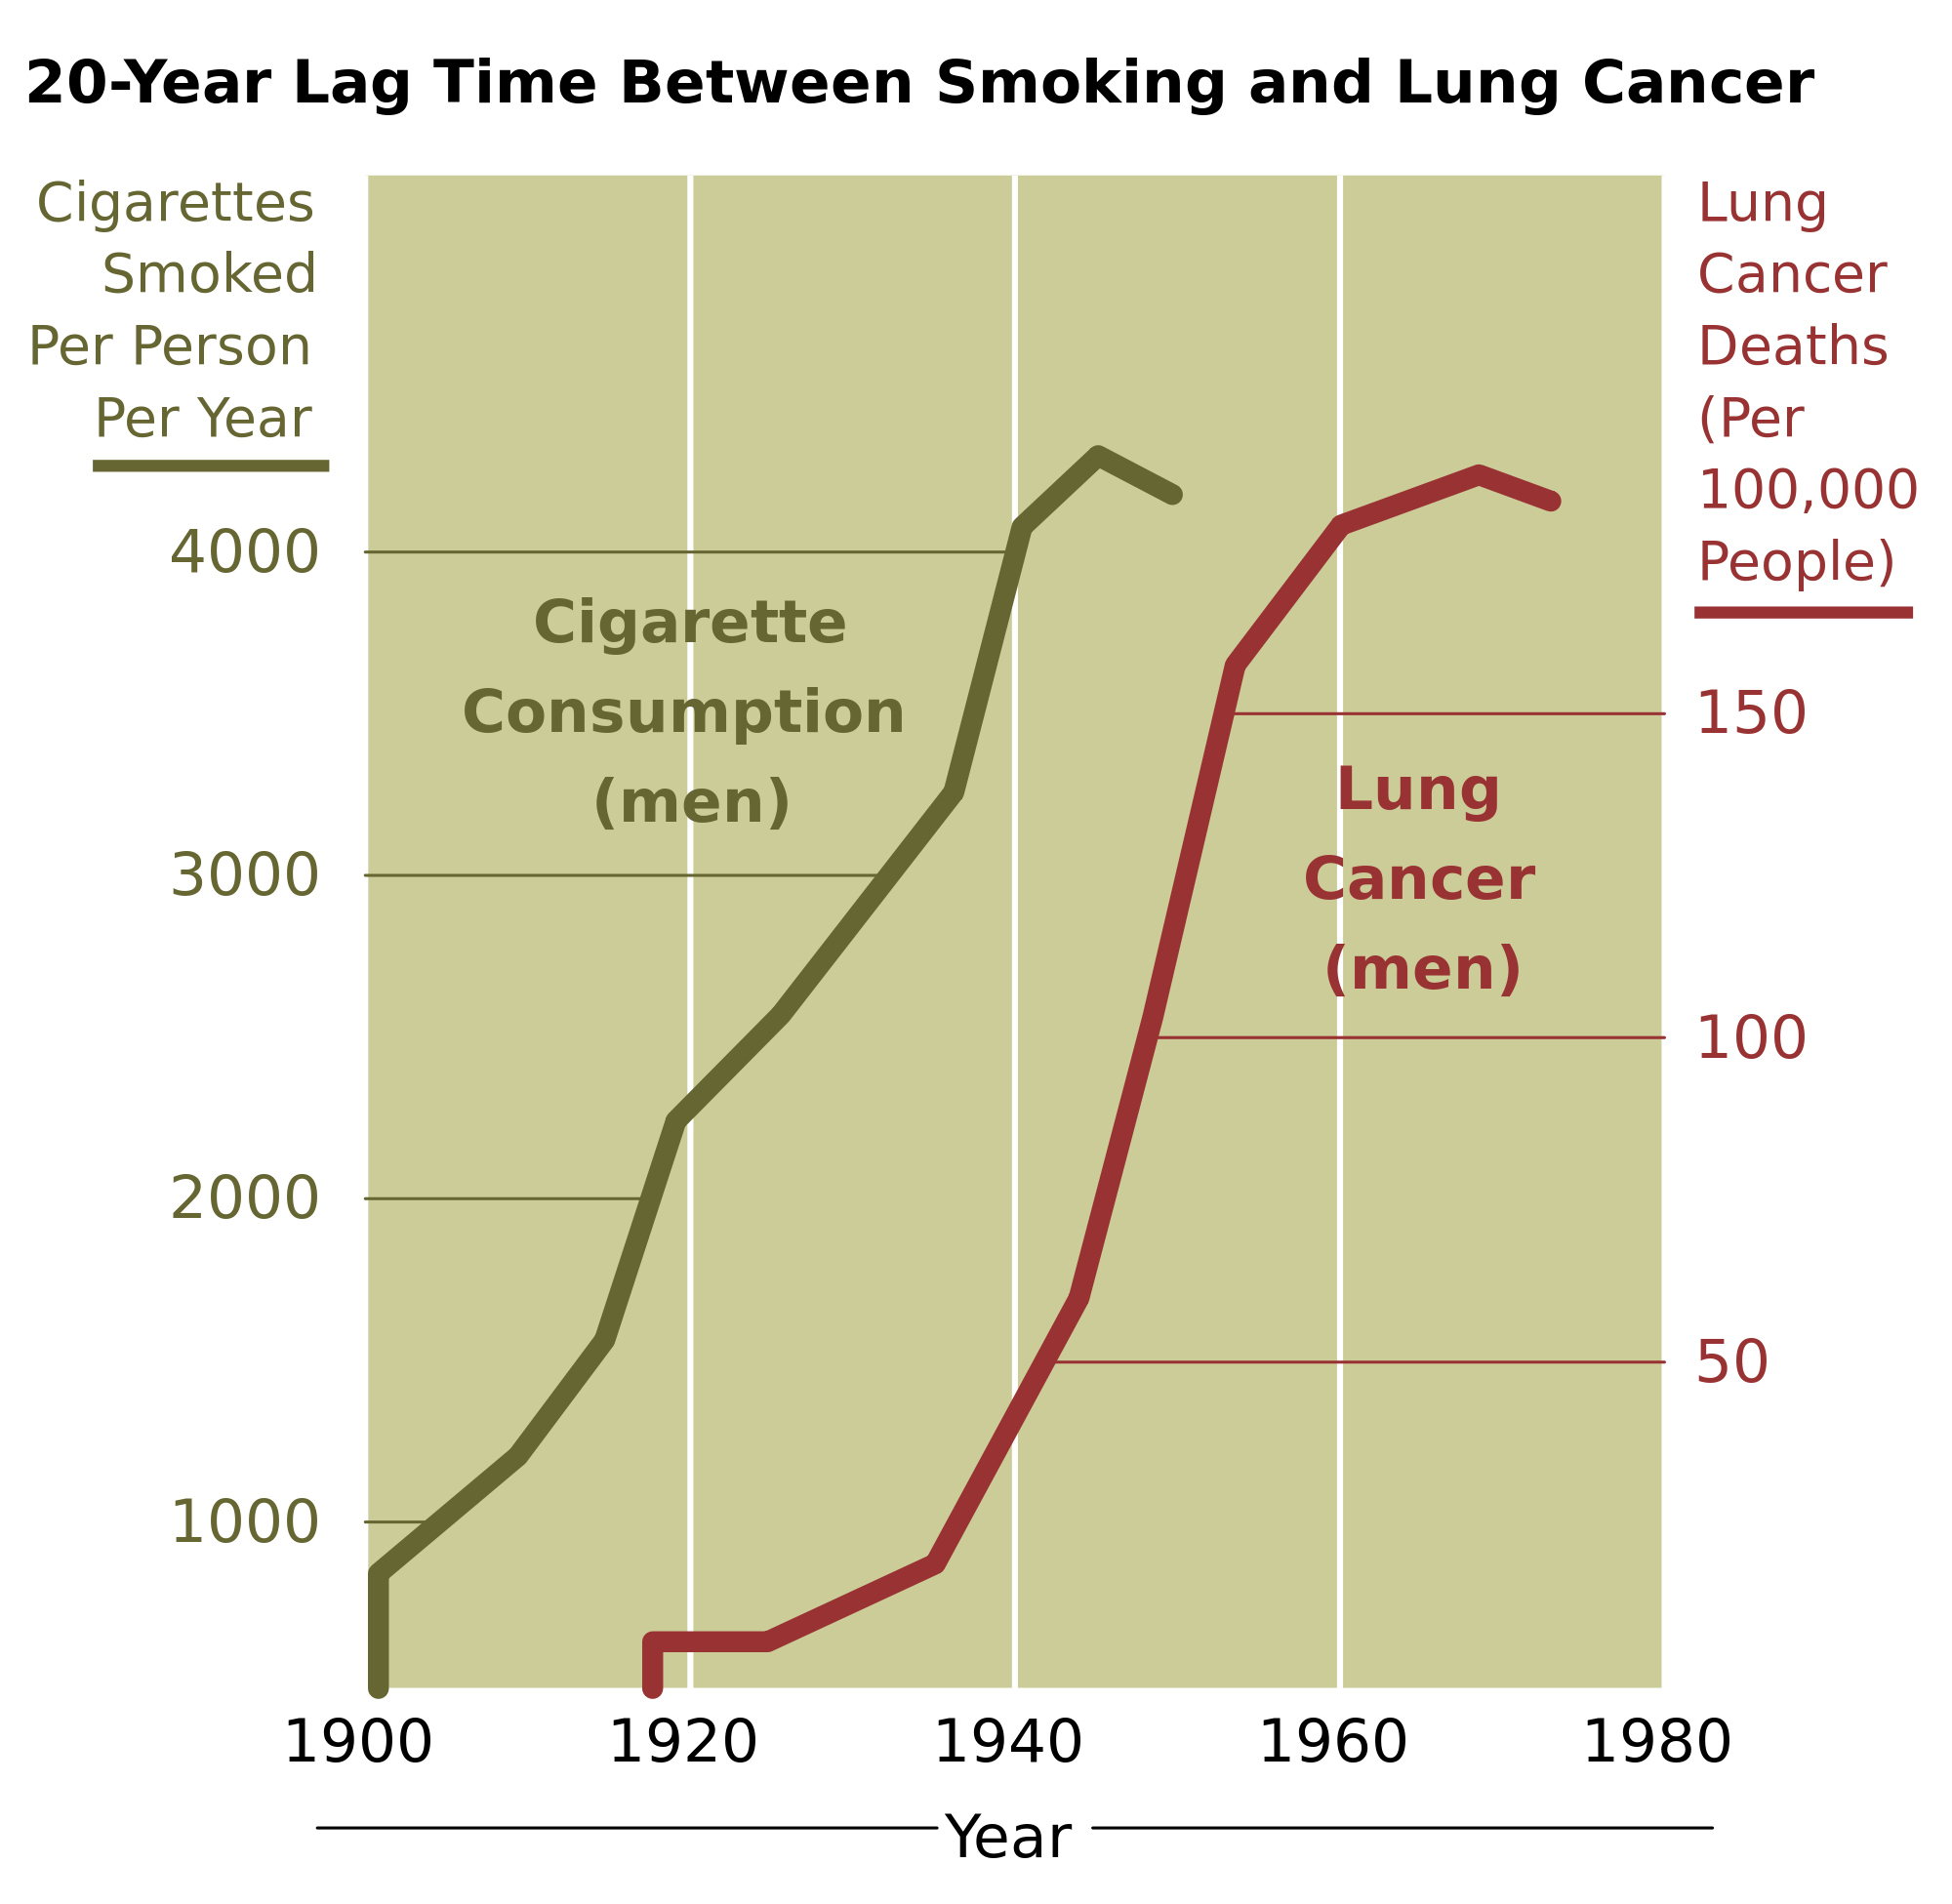 13.6.3 Smoking vs. Lung Cancer Deaths